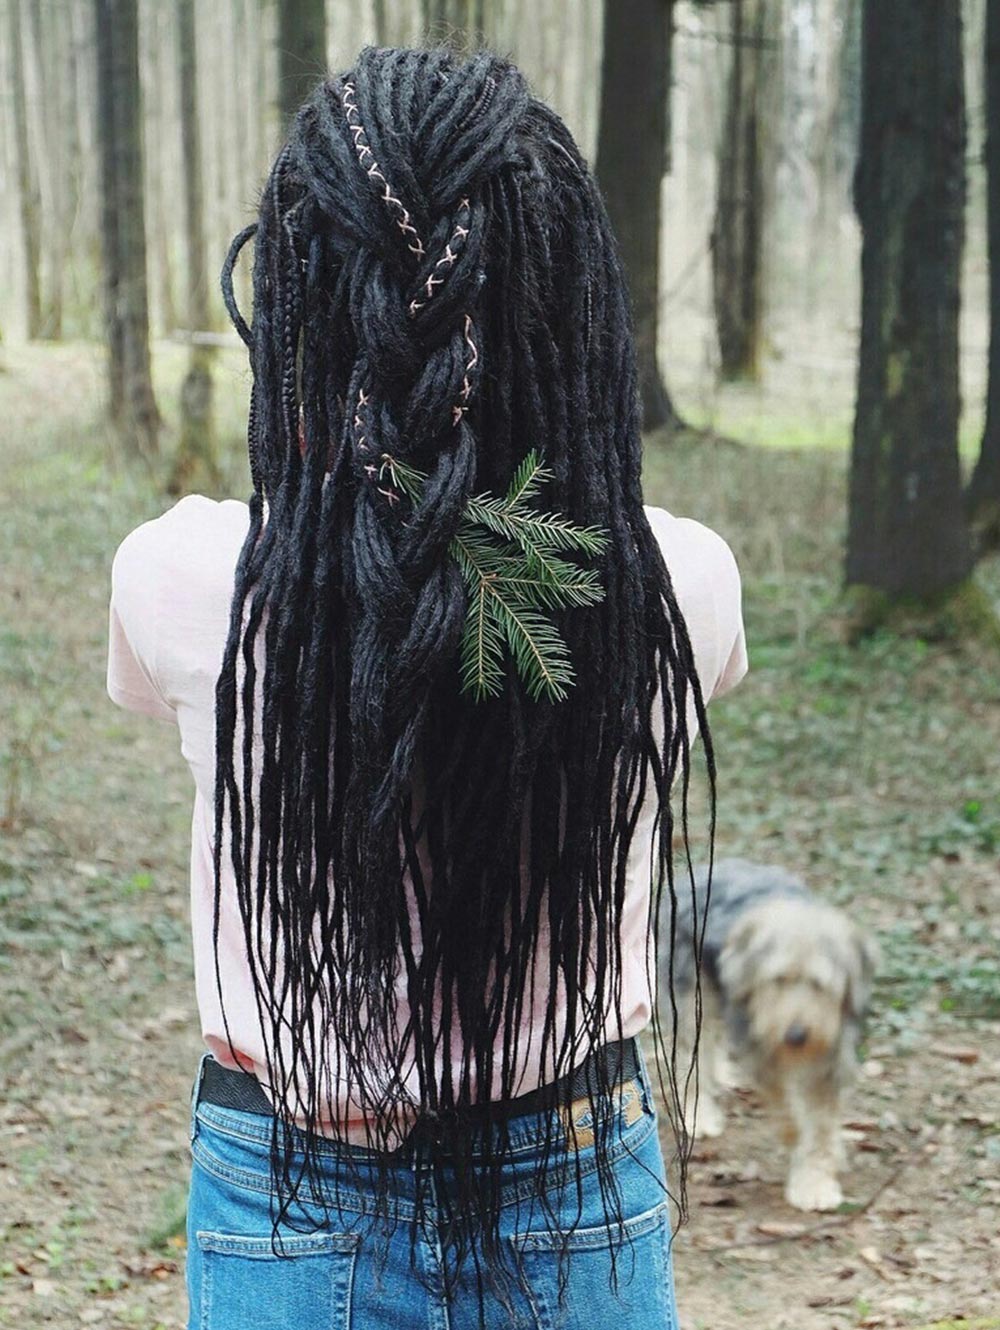 Wholesale ---One dread for each color  24" Thin 0.6cm Synthetic Dreadlock Extensions